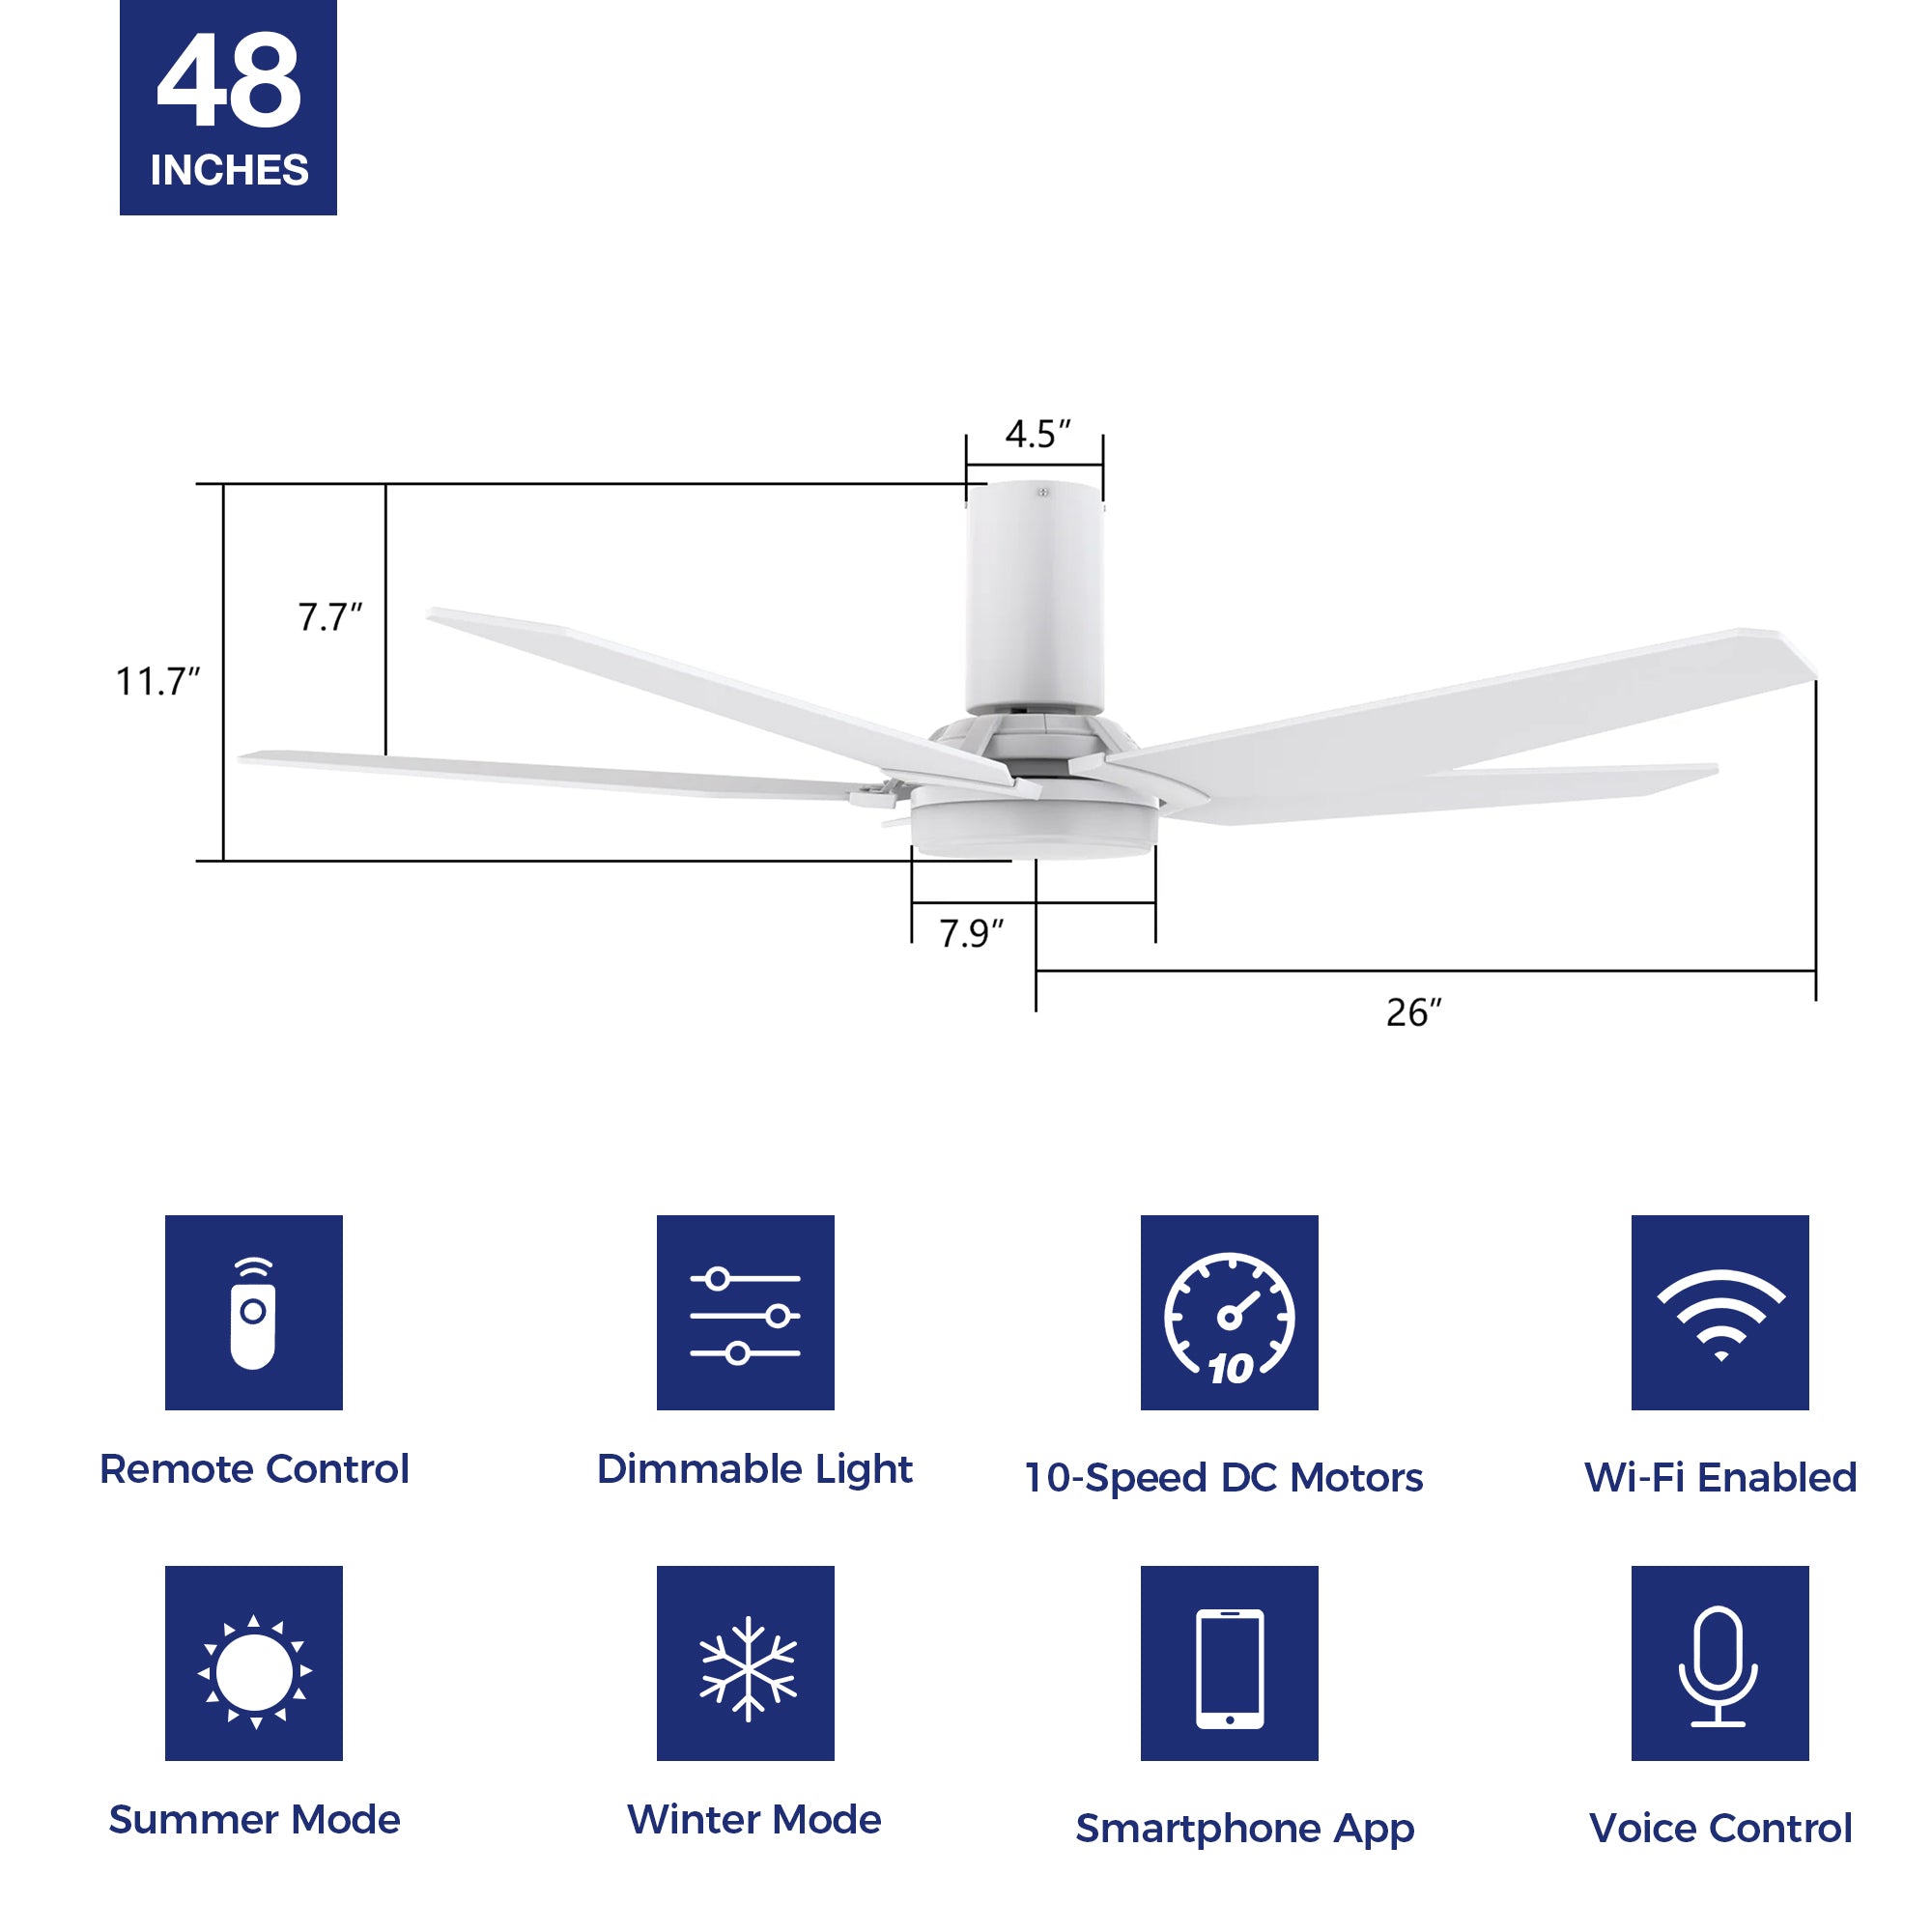 This Voyager 48&#39;&#39; smart ceiling fan keeps your space cool, bright, and stylish. It is a soft modern masterpiece perfect for your large indoor living spaces. This Wifi smart ceiling fan is a simplicity designing with Black finish, use elegant Plywood blades, Glass shade and has an integrated 4000K LED cool light. The fan features Remote control, Wi-Fi apps, Siri Shortcut and Voice control technology (compatible with Amazon Alexa and Google Home Assistant ) to set fan preferences.